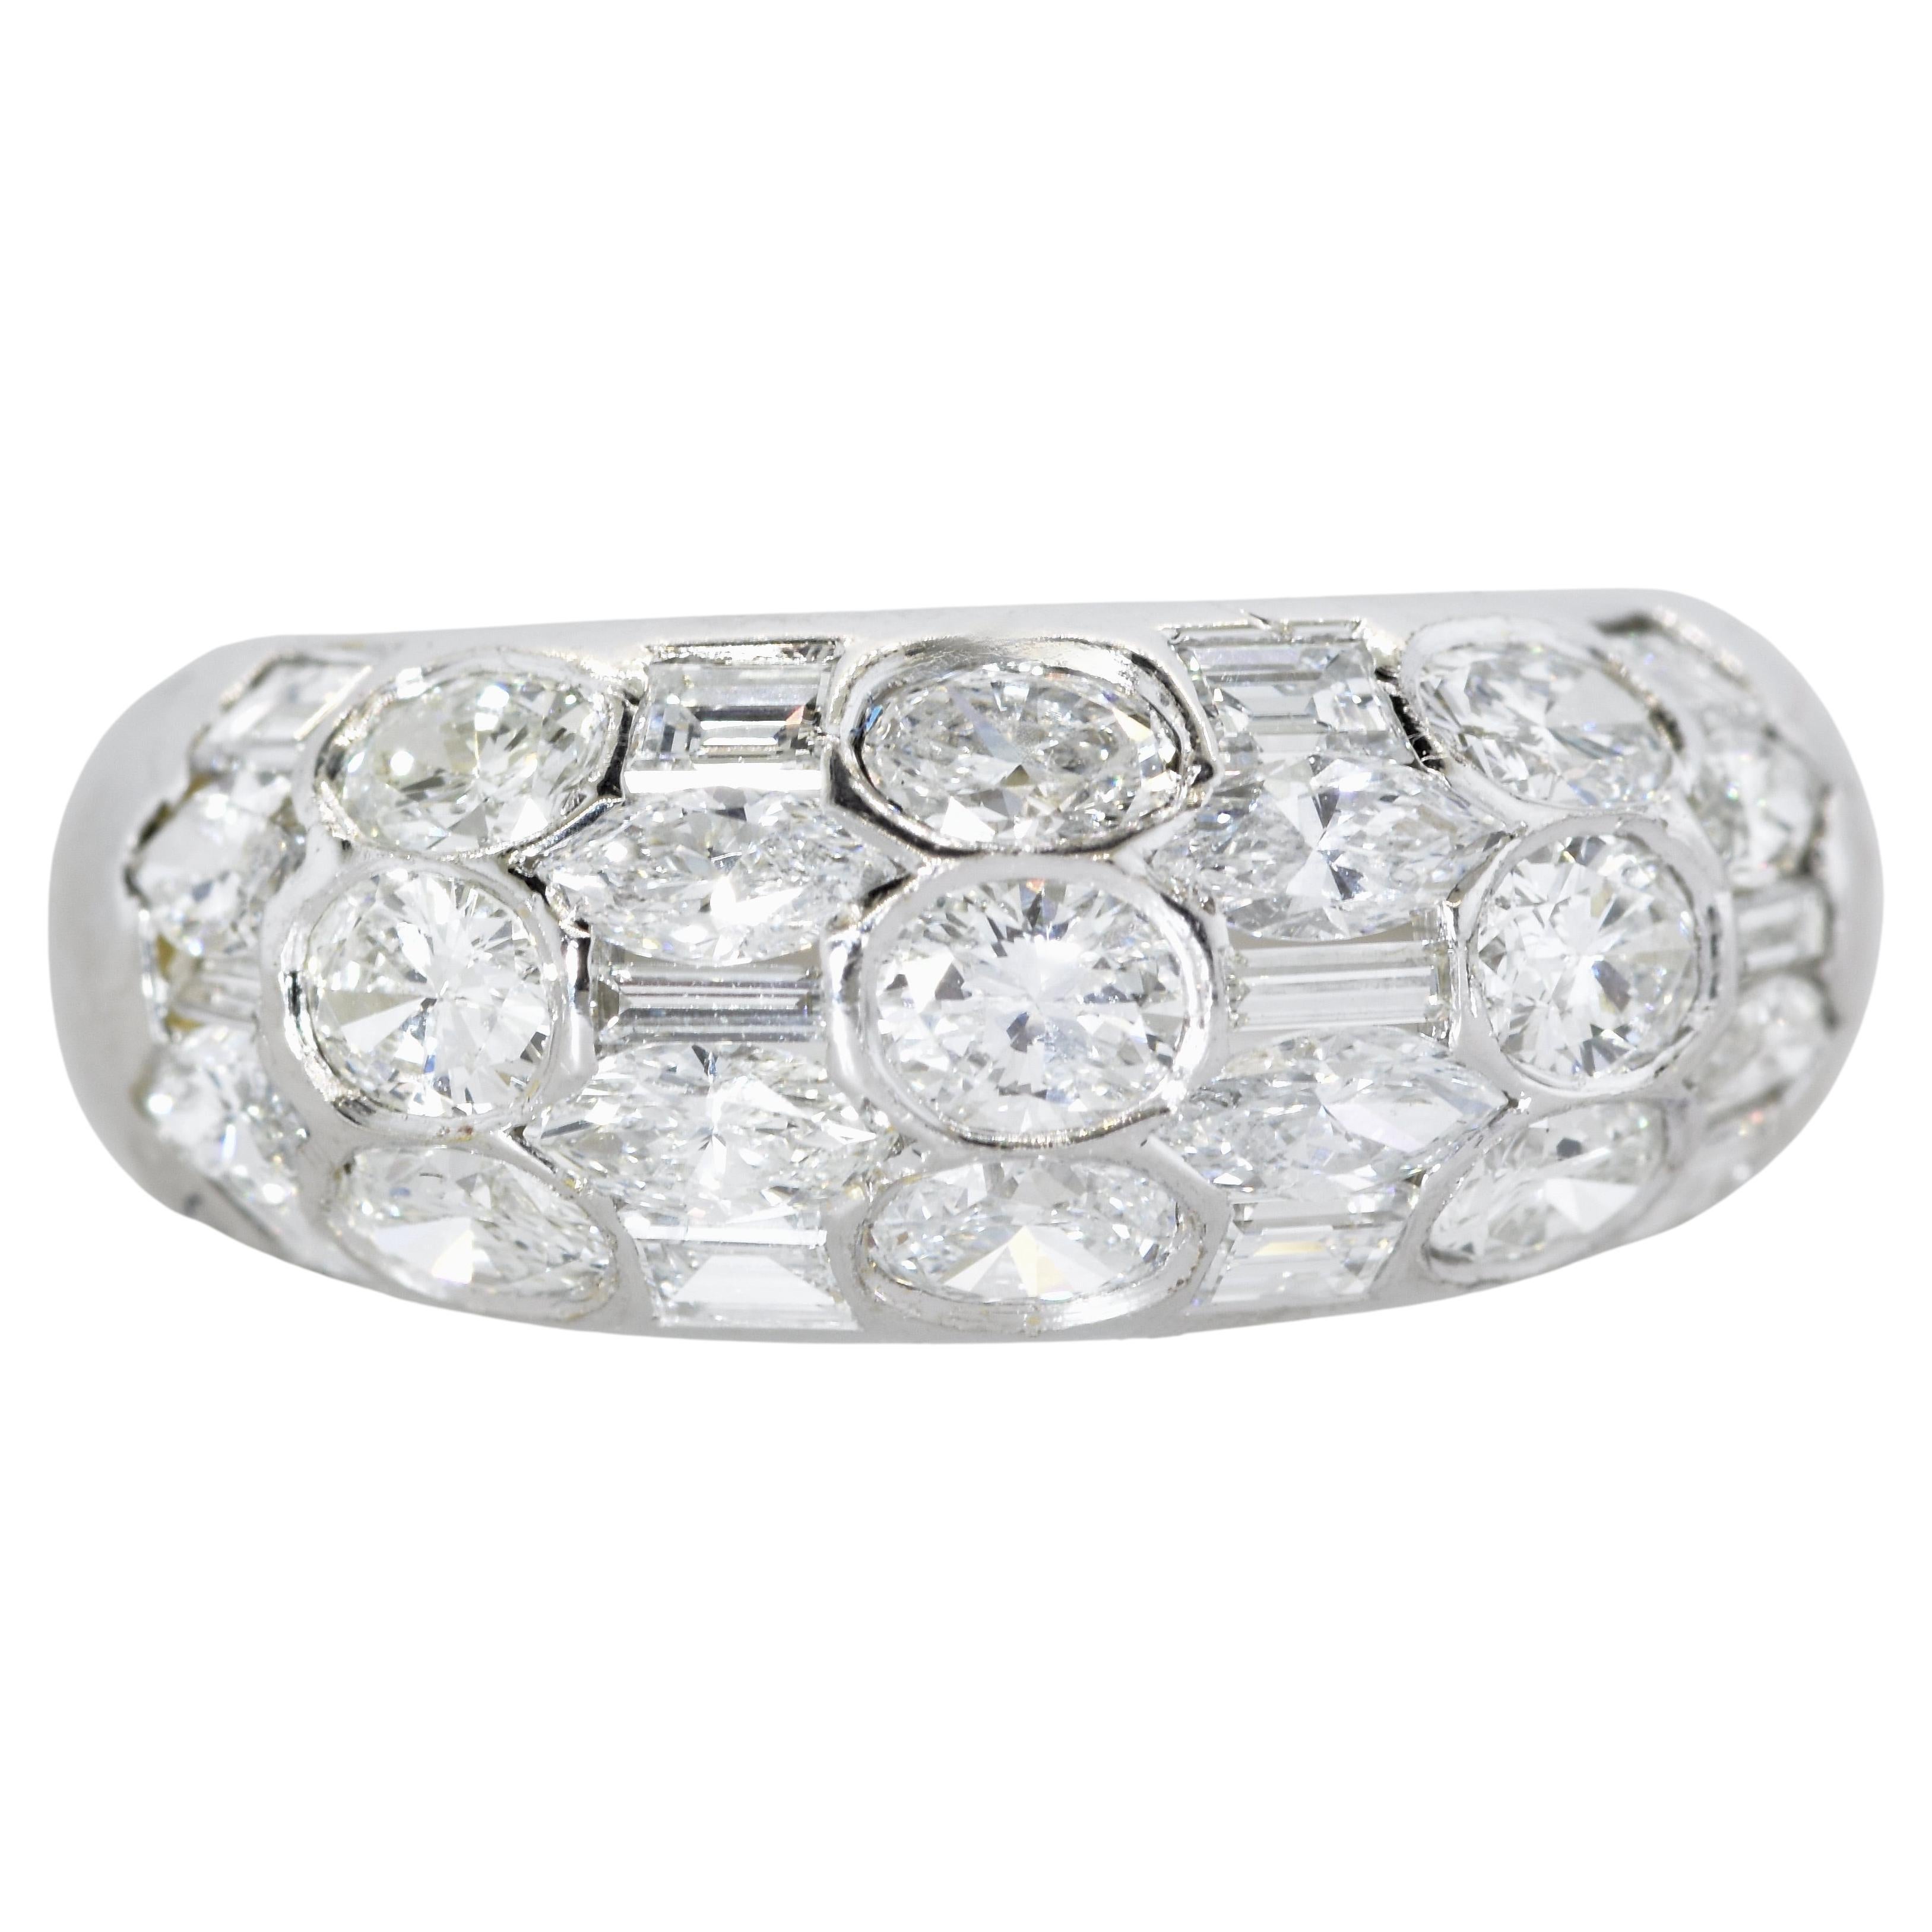 Diamond dome ring with 29 stones amounting to an estimated 2.50 cts of fine white fancy cut diamonds - all near colorless (G/H), and very slightly included (VS1). The diamonds are well matched in quality.  There are 4 different cuts: oval cut,